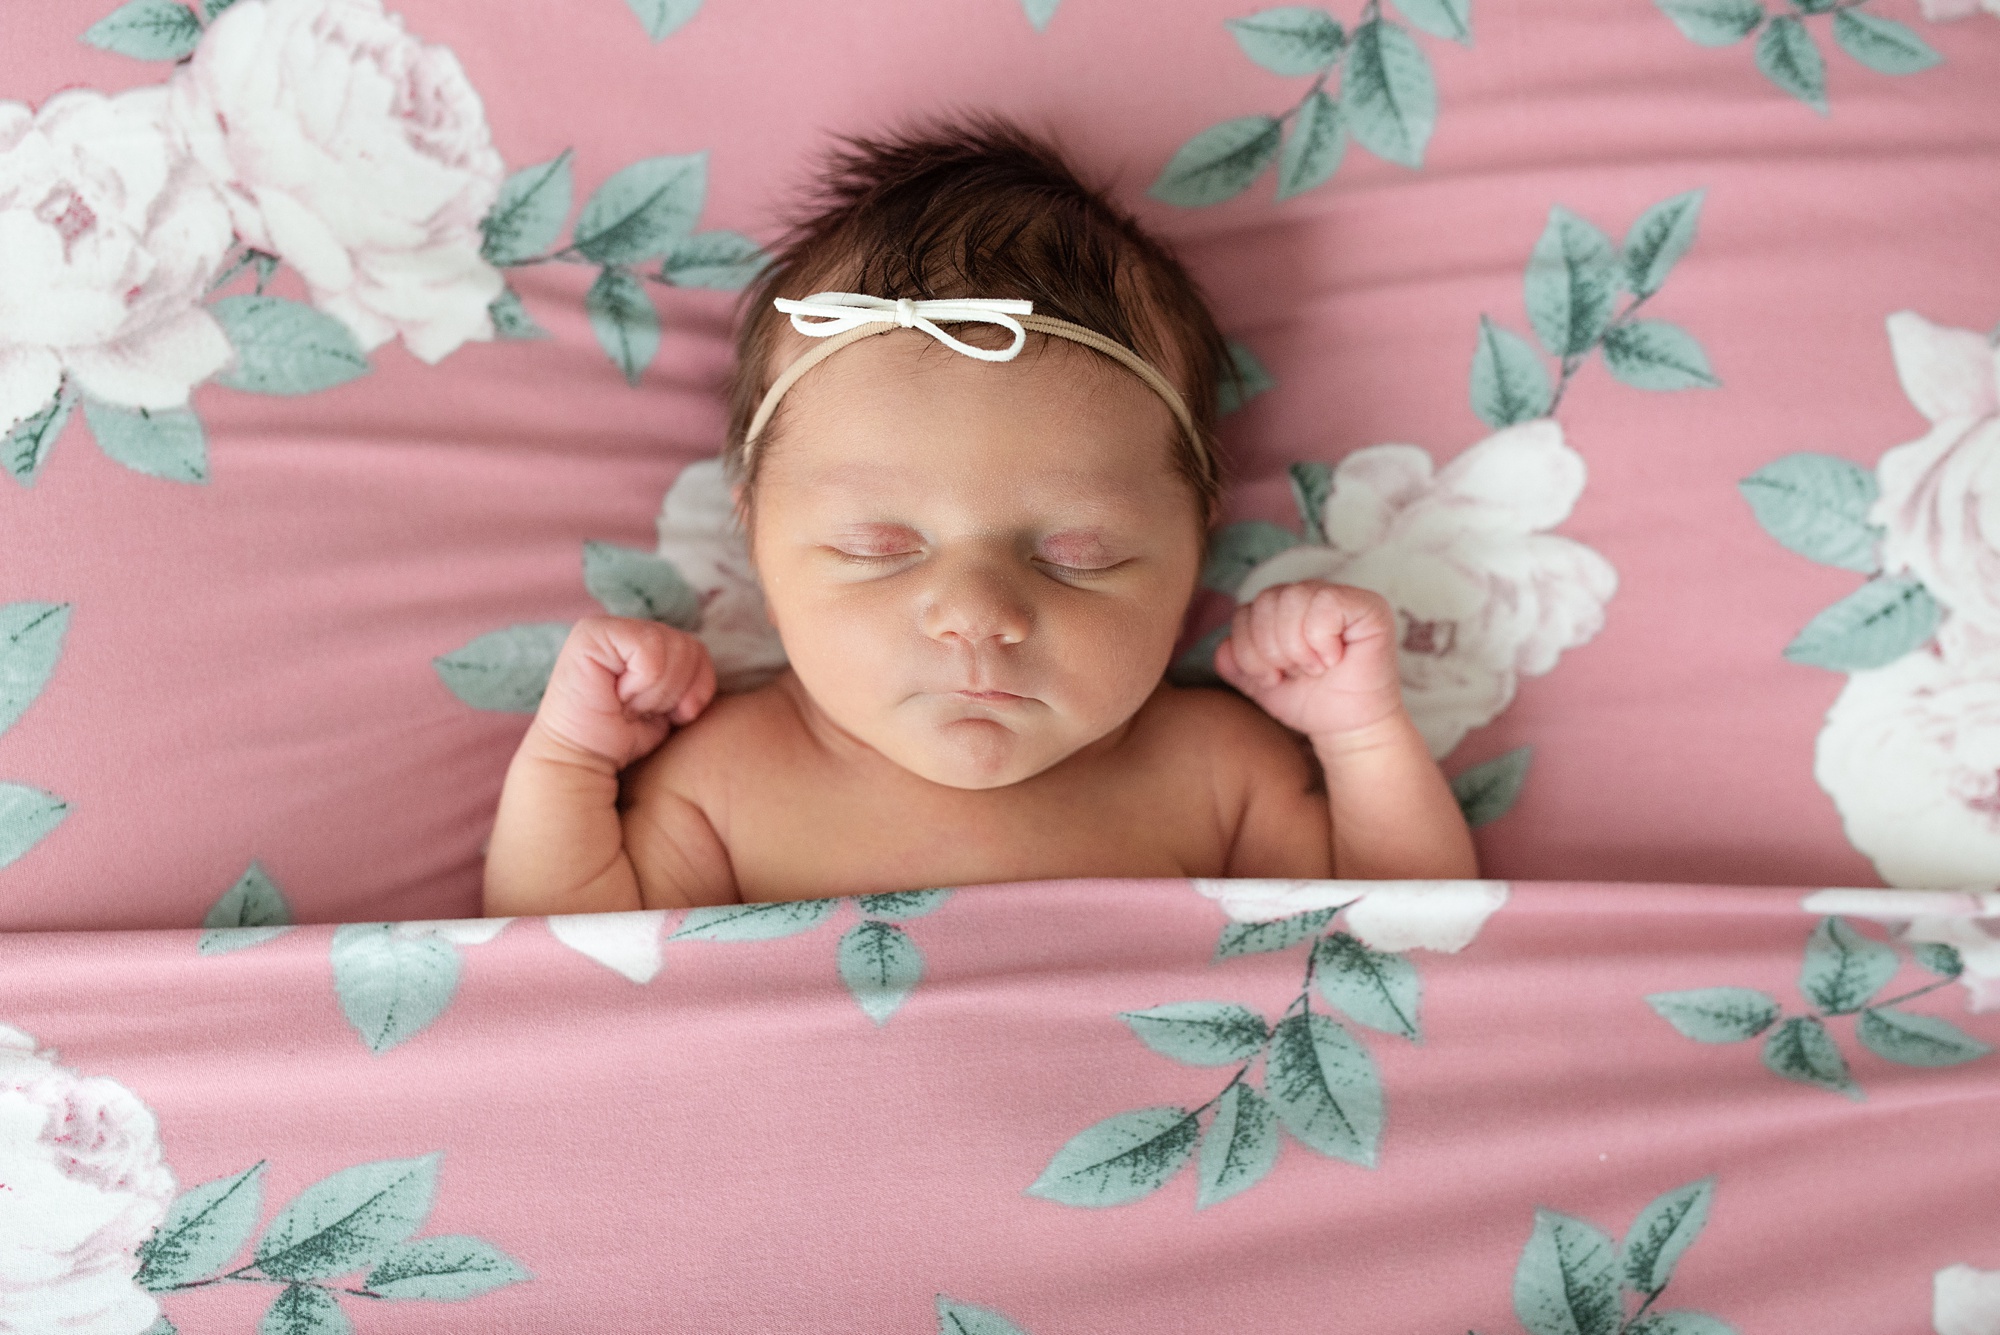 baby sleeps on pink sheets during newborn photos at home